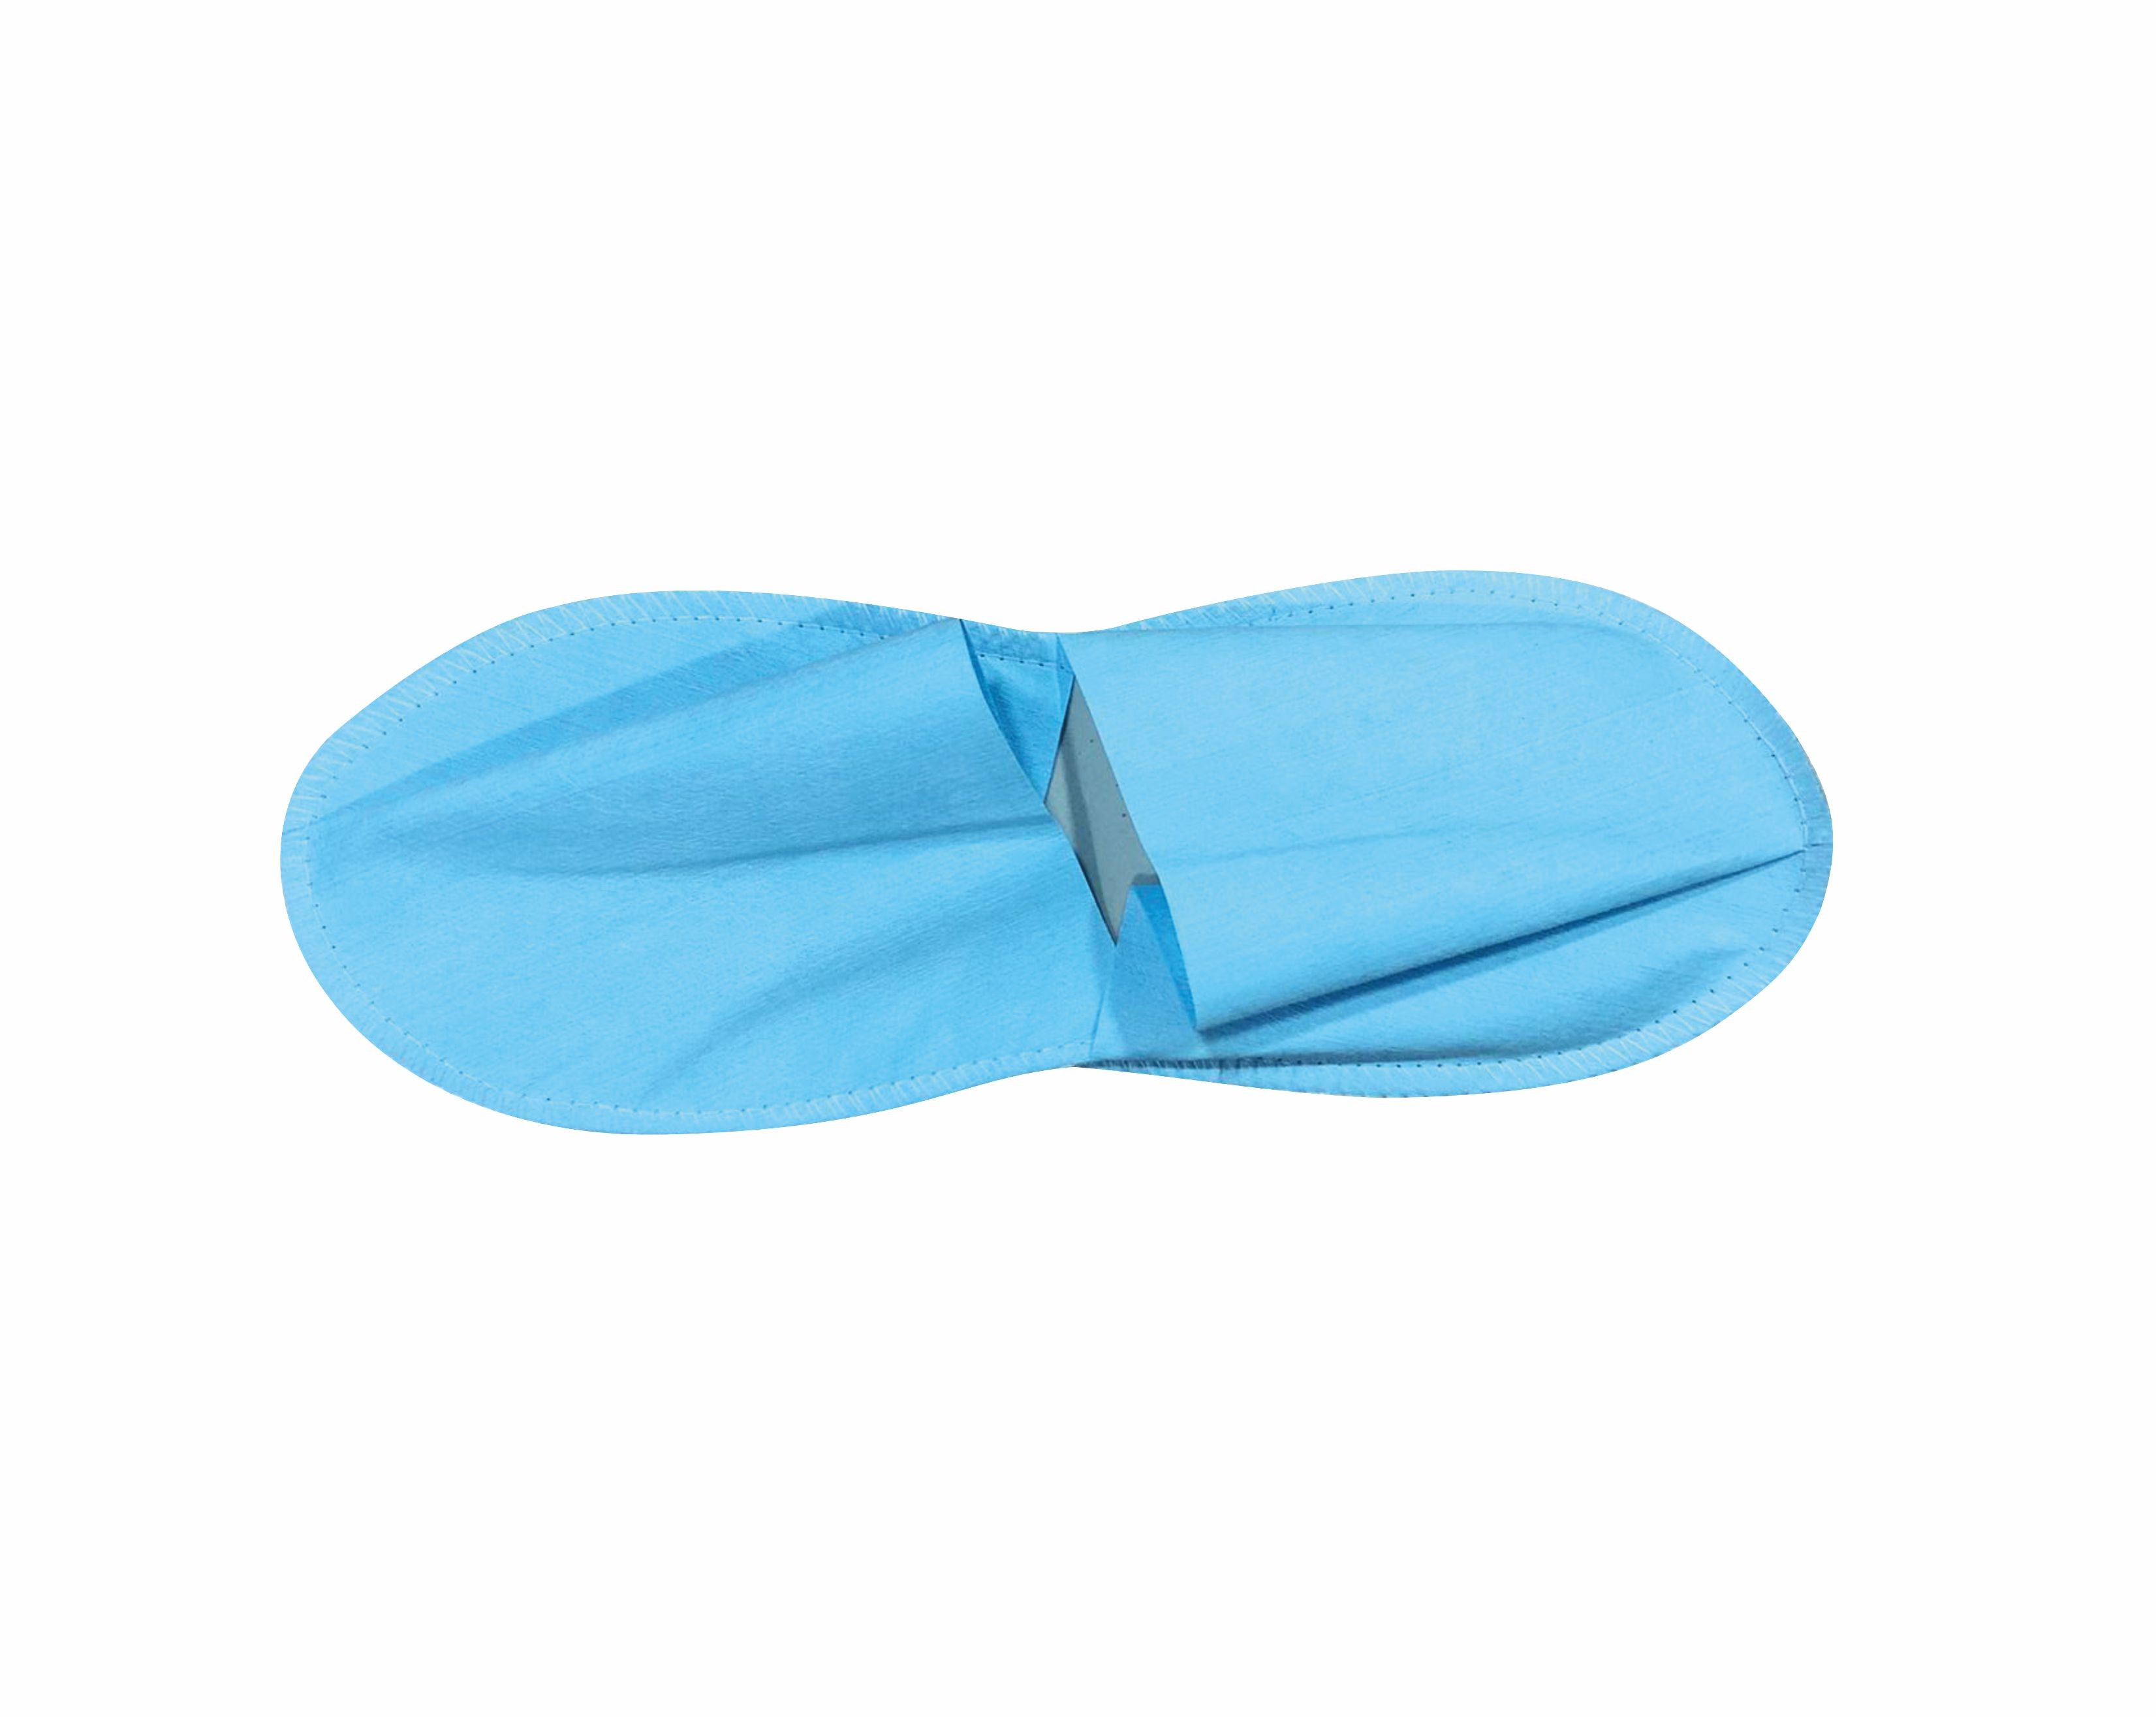  Eva Sole Slippers 25 pairs Blue - Disposable